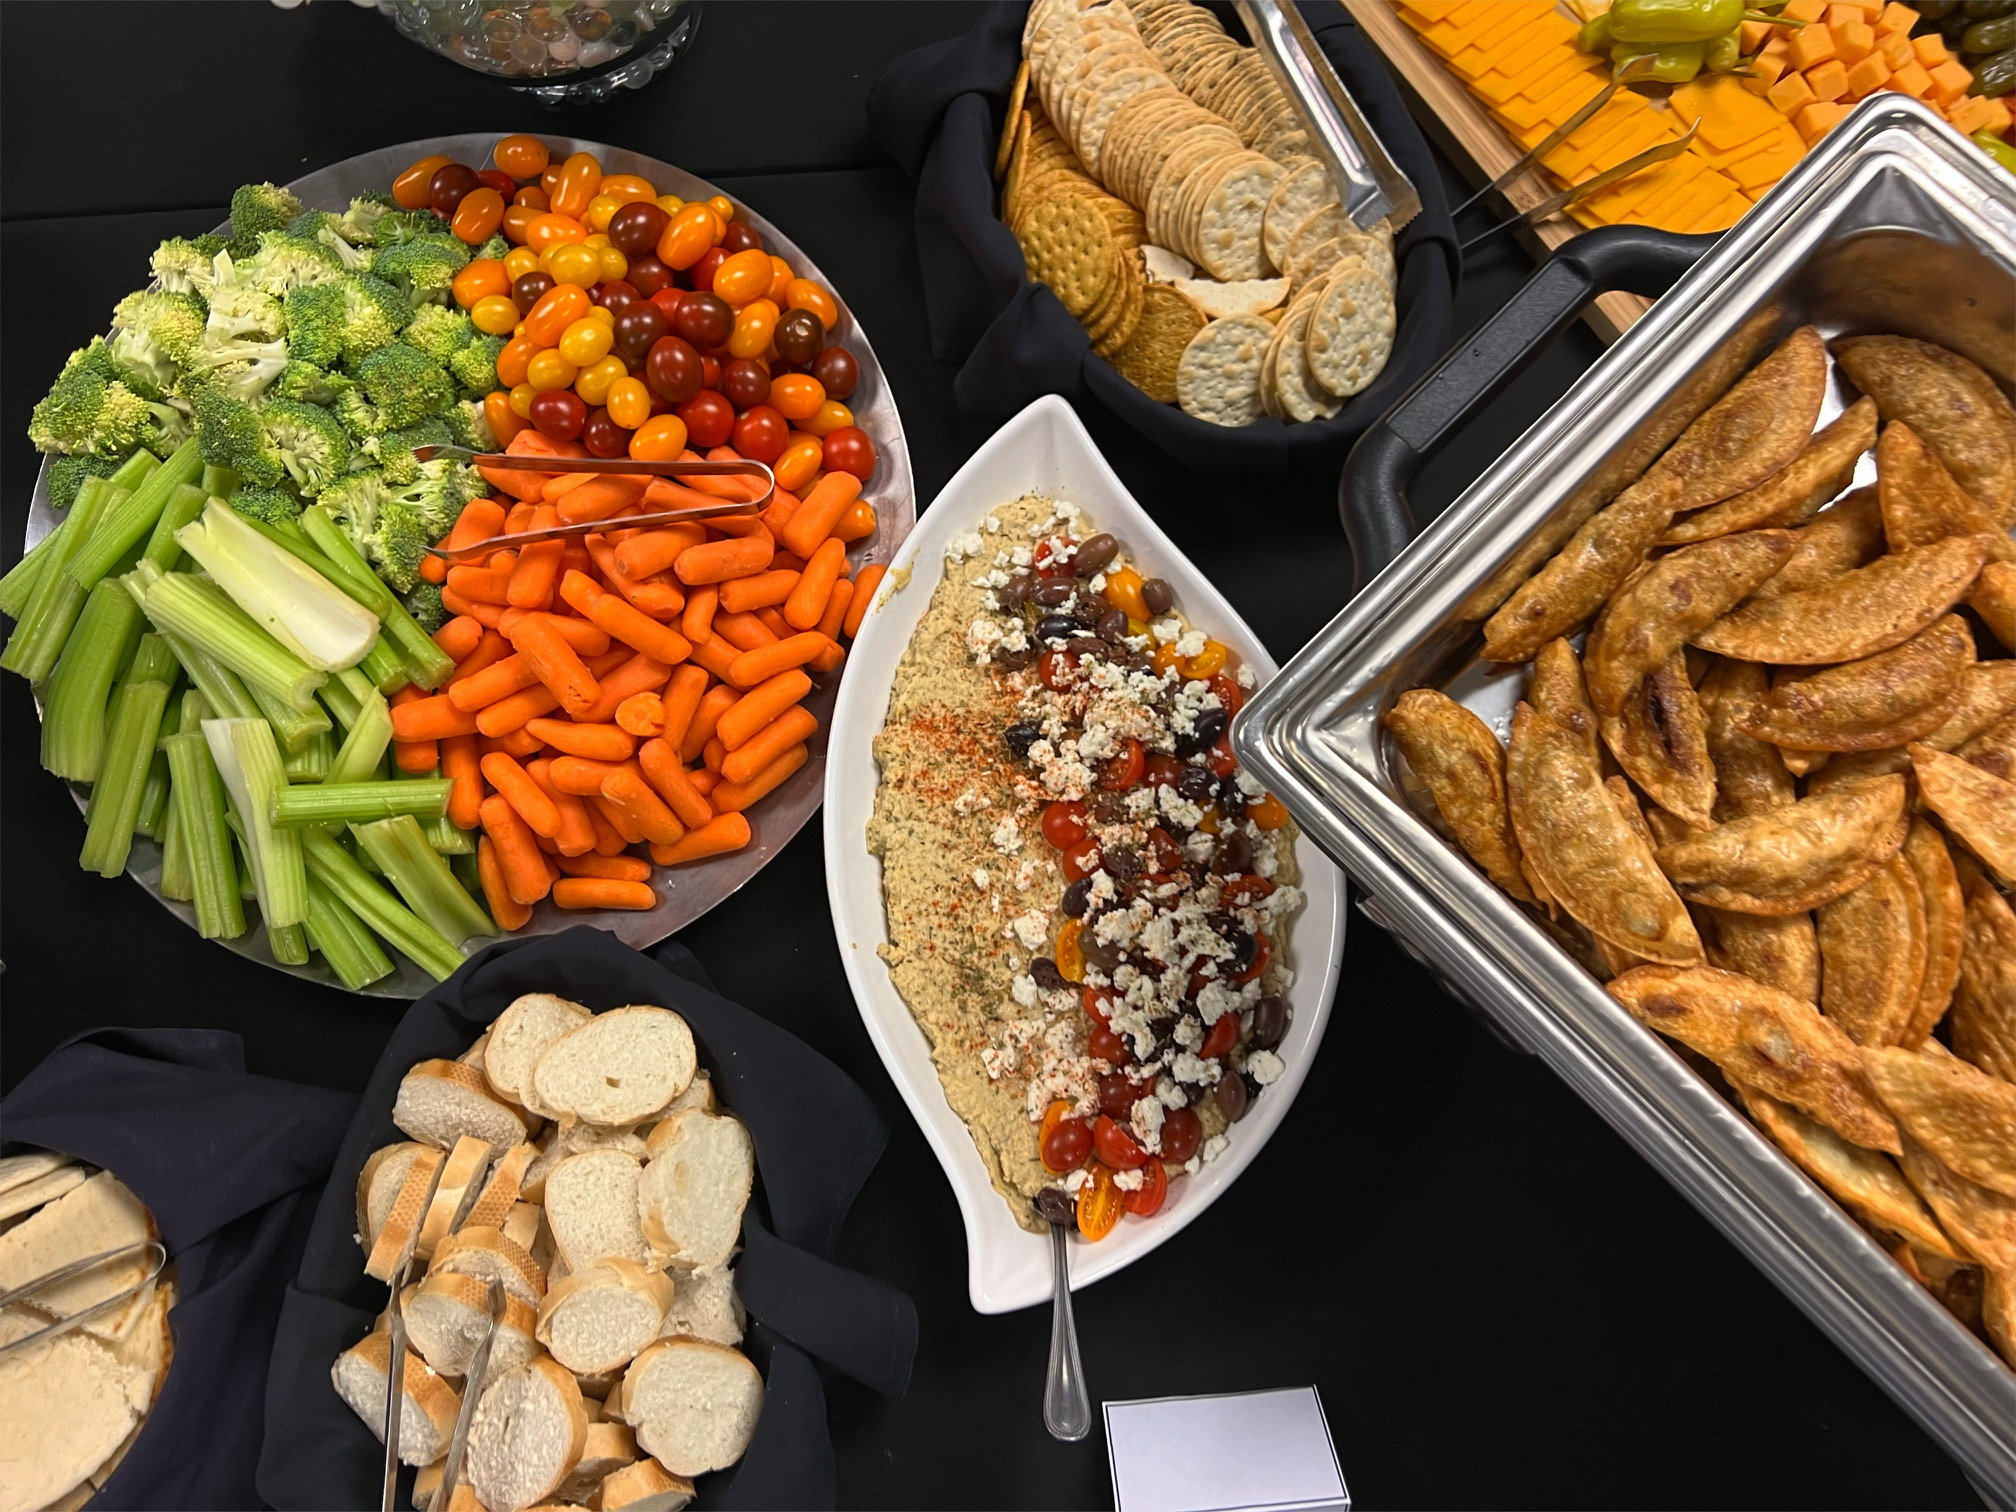 On a black table, trays of appetizers catered by Dish Passionate Cuisine are beautifully arranged. Photo by Alyssa Buckley.